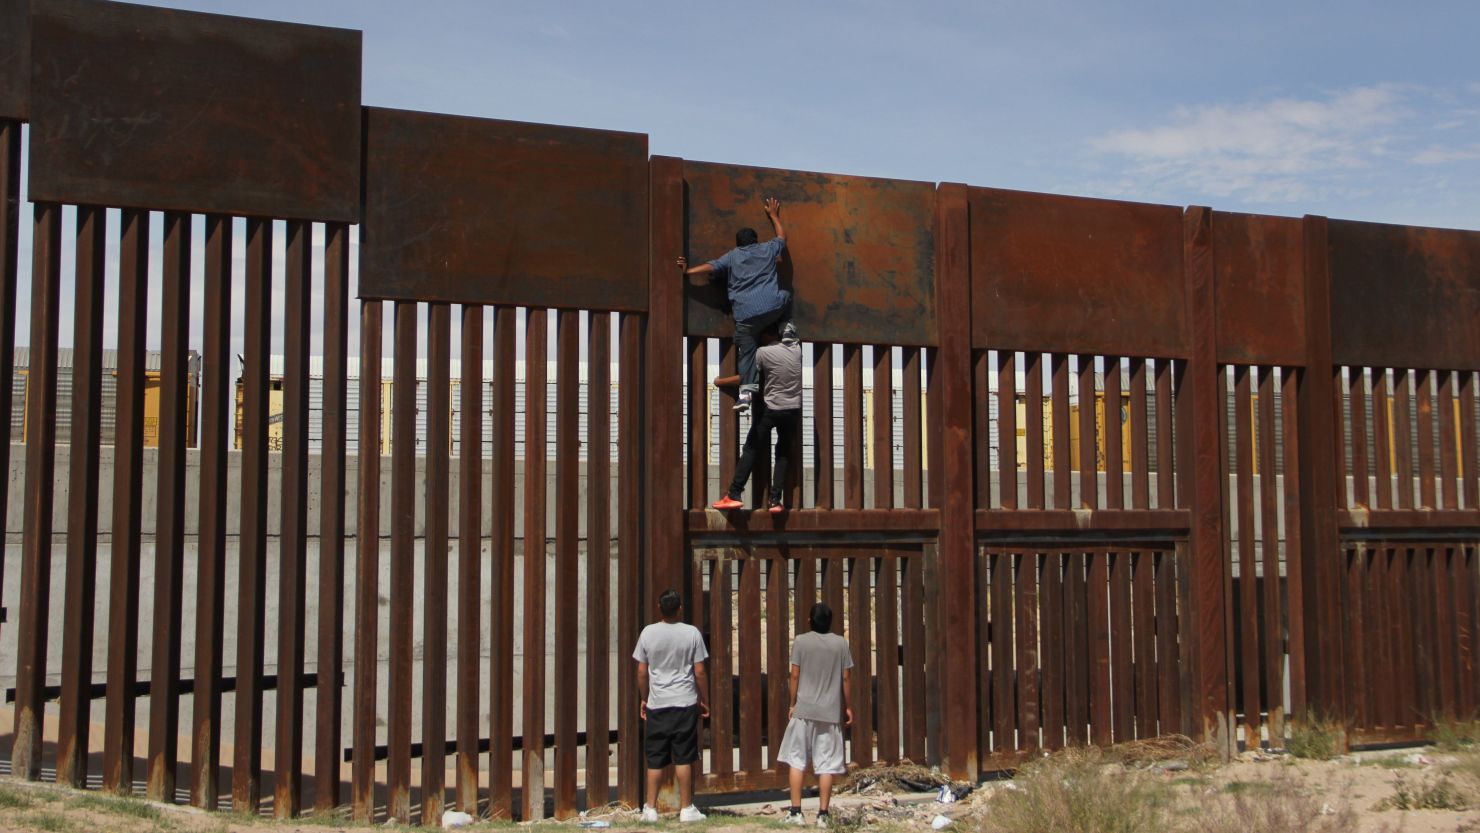 A young Mexican helps a compatriot to climb the metal wall that divides the border between Mexico and the United States to cross illegally to Sunland Park, from Ciudad Juarez, Chihuahua state, Mexico on April 6, 2018. (HERIKA MARTINEZ/AFP/Getty Images)